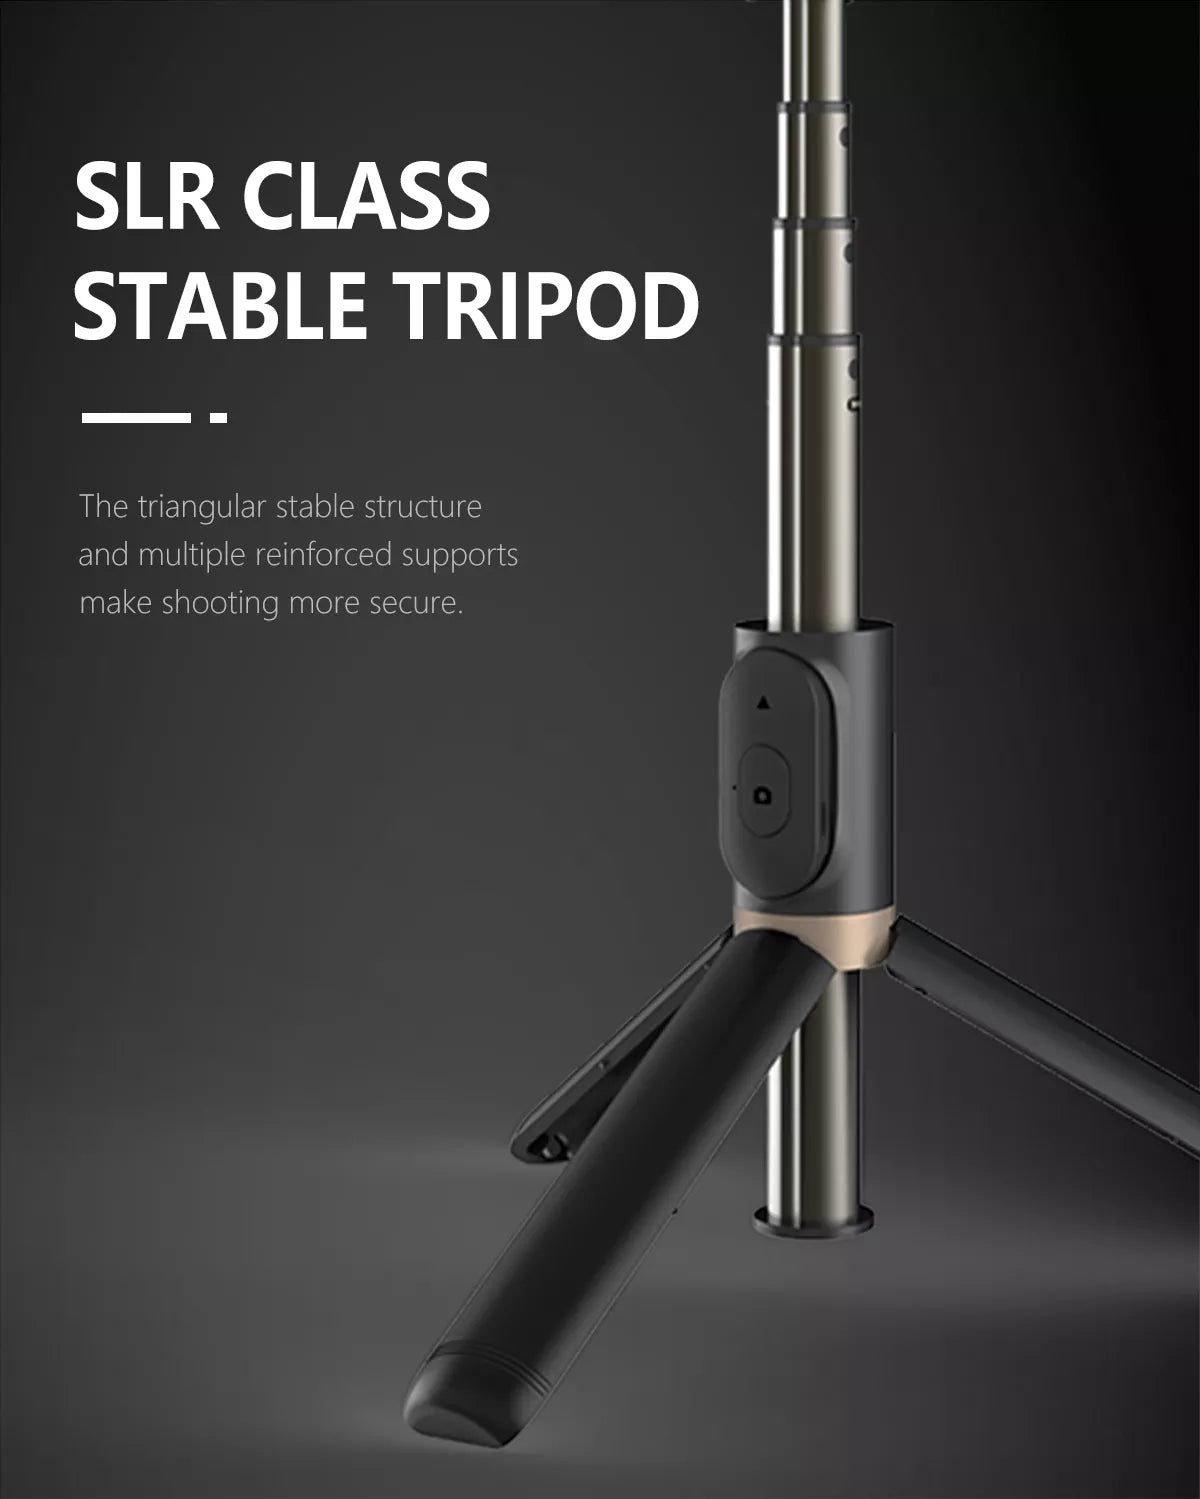 4 in 1 Selfie Stick + Tripod Stand with Light and Wireless Remote